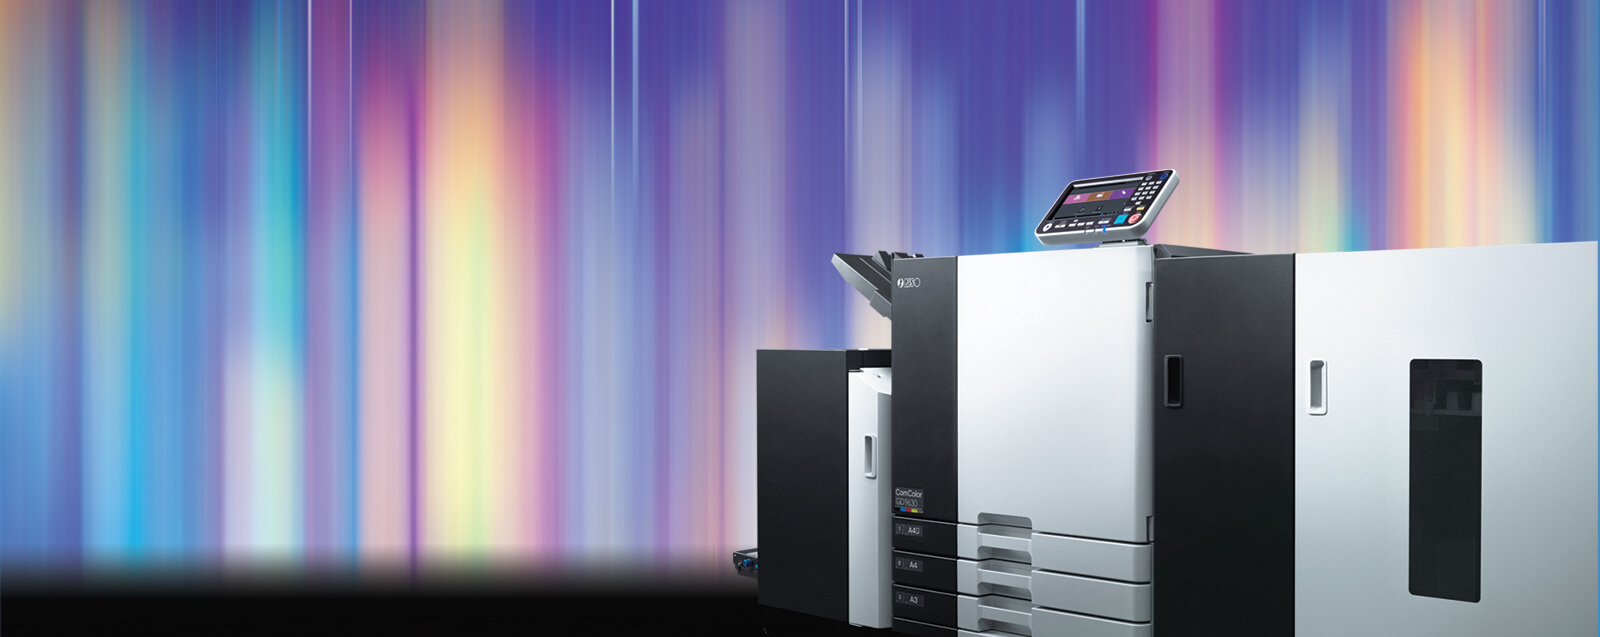 Inkjet, a complement to<br>traditional printing devices.